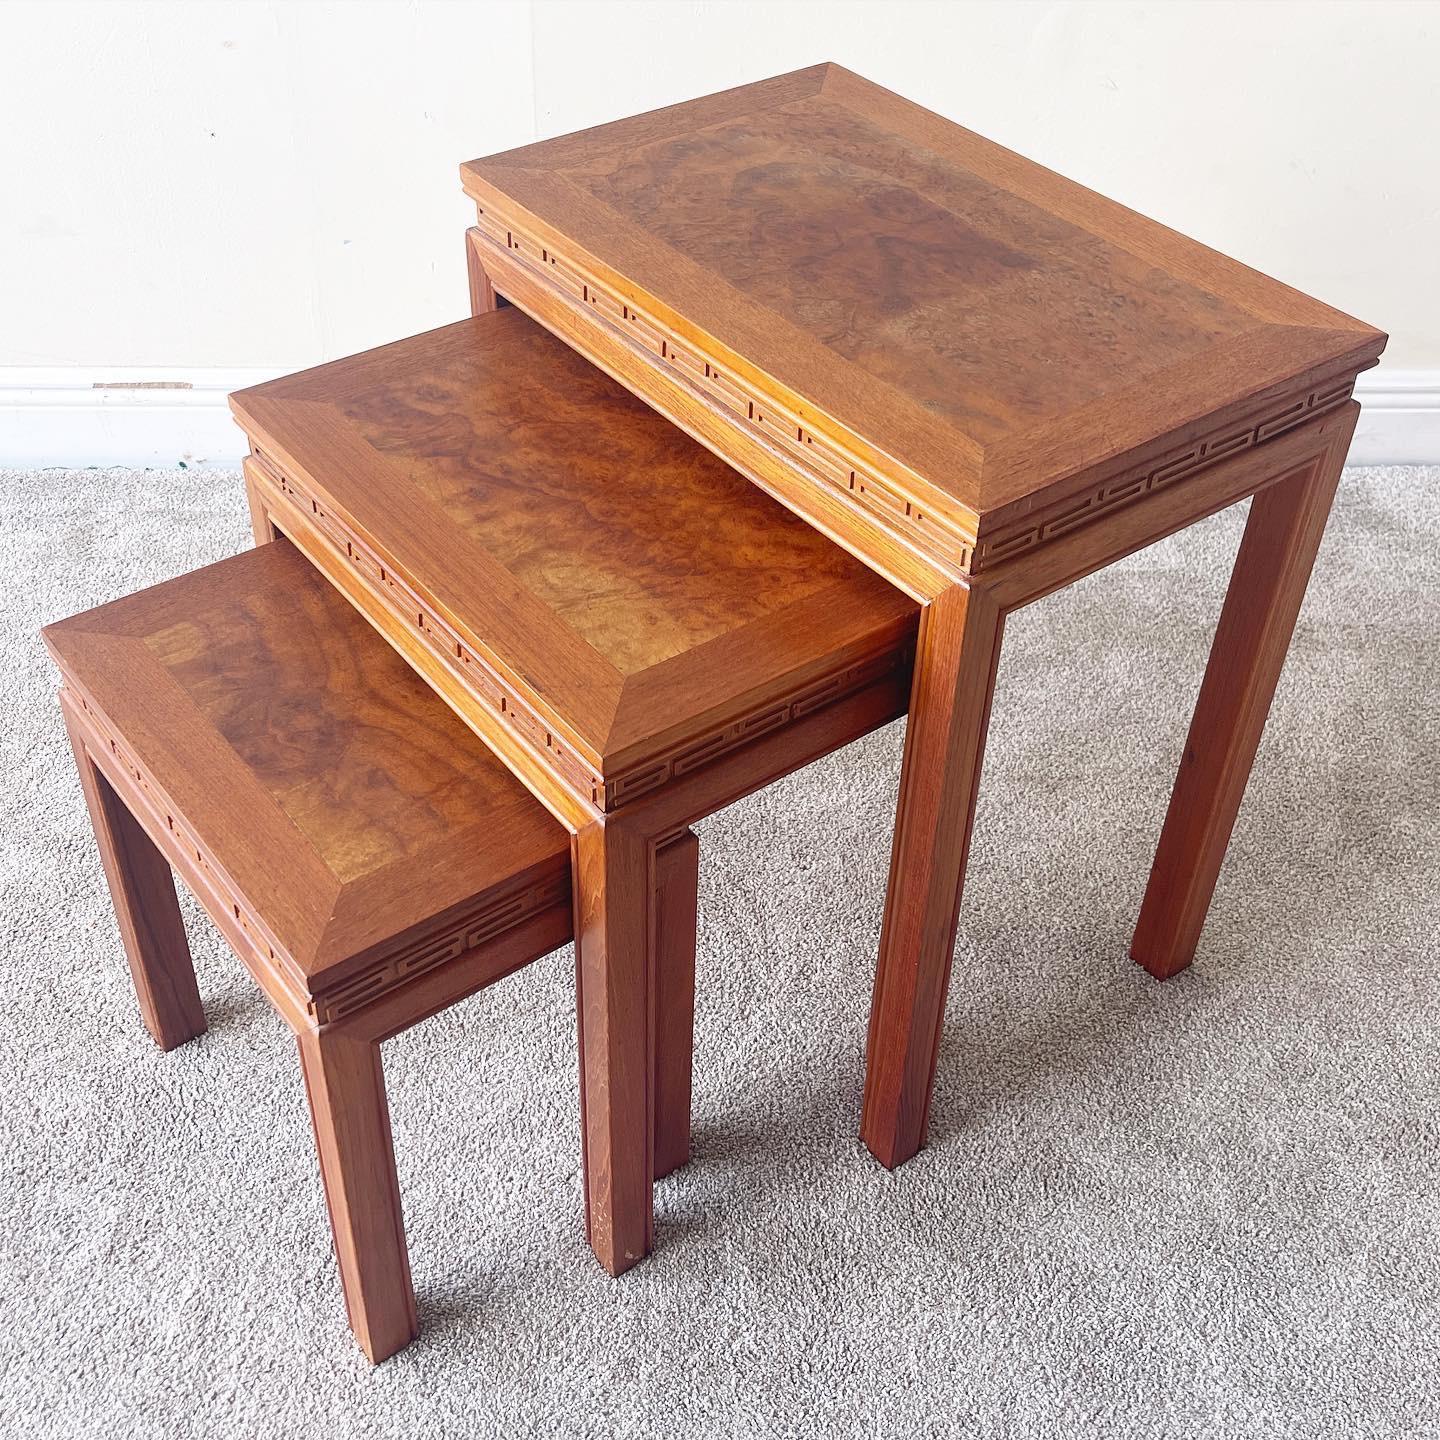 Excellent set of 3 hand carved cherry nesting tables. Each table features a centered Burl Wood veneer

Additional information: 
Material: Burlwood, Veneer
Color: Brown
Style: Asian
Time Period: 1960s
Dimension:
Large: 22